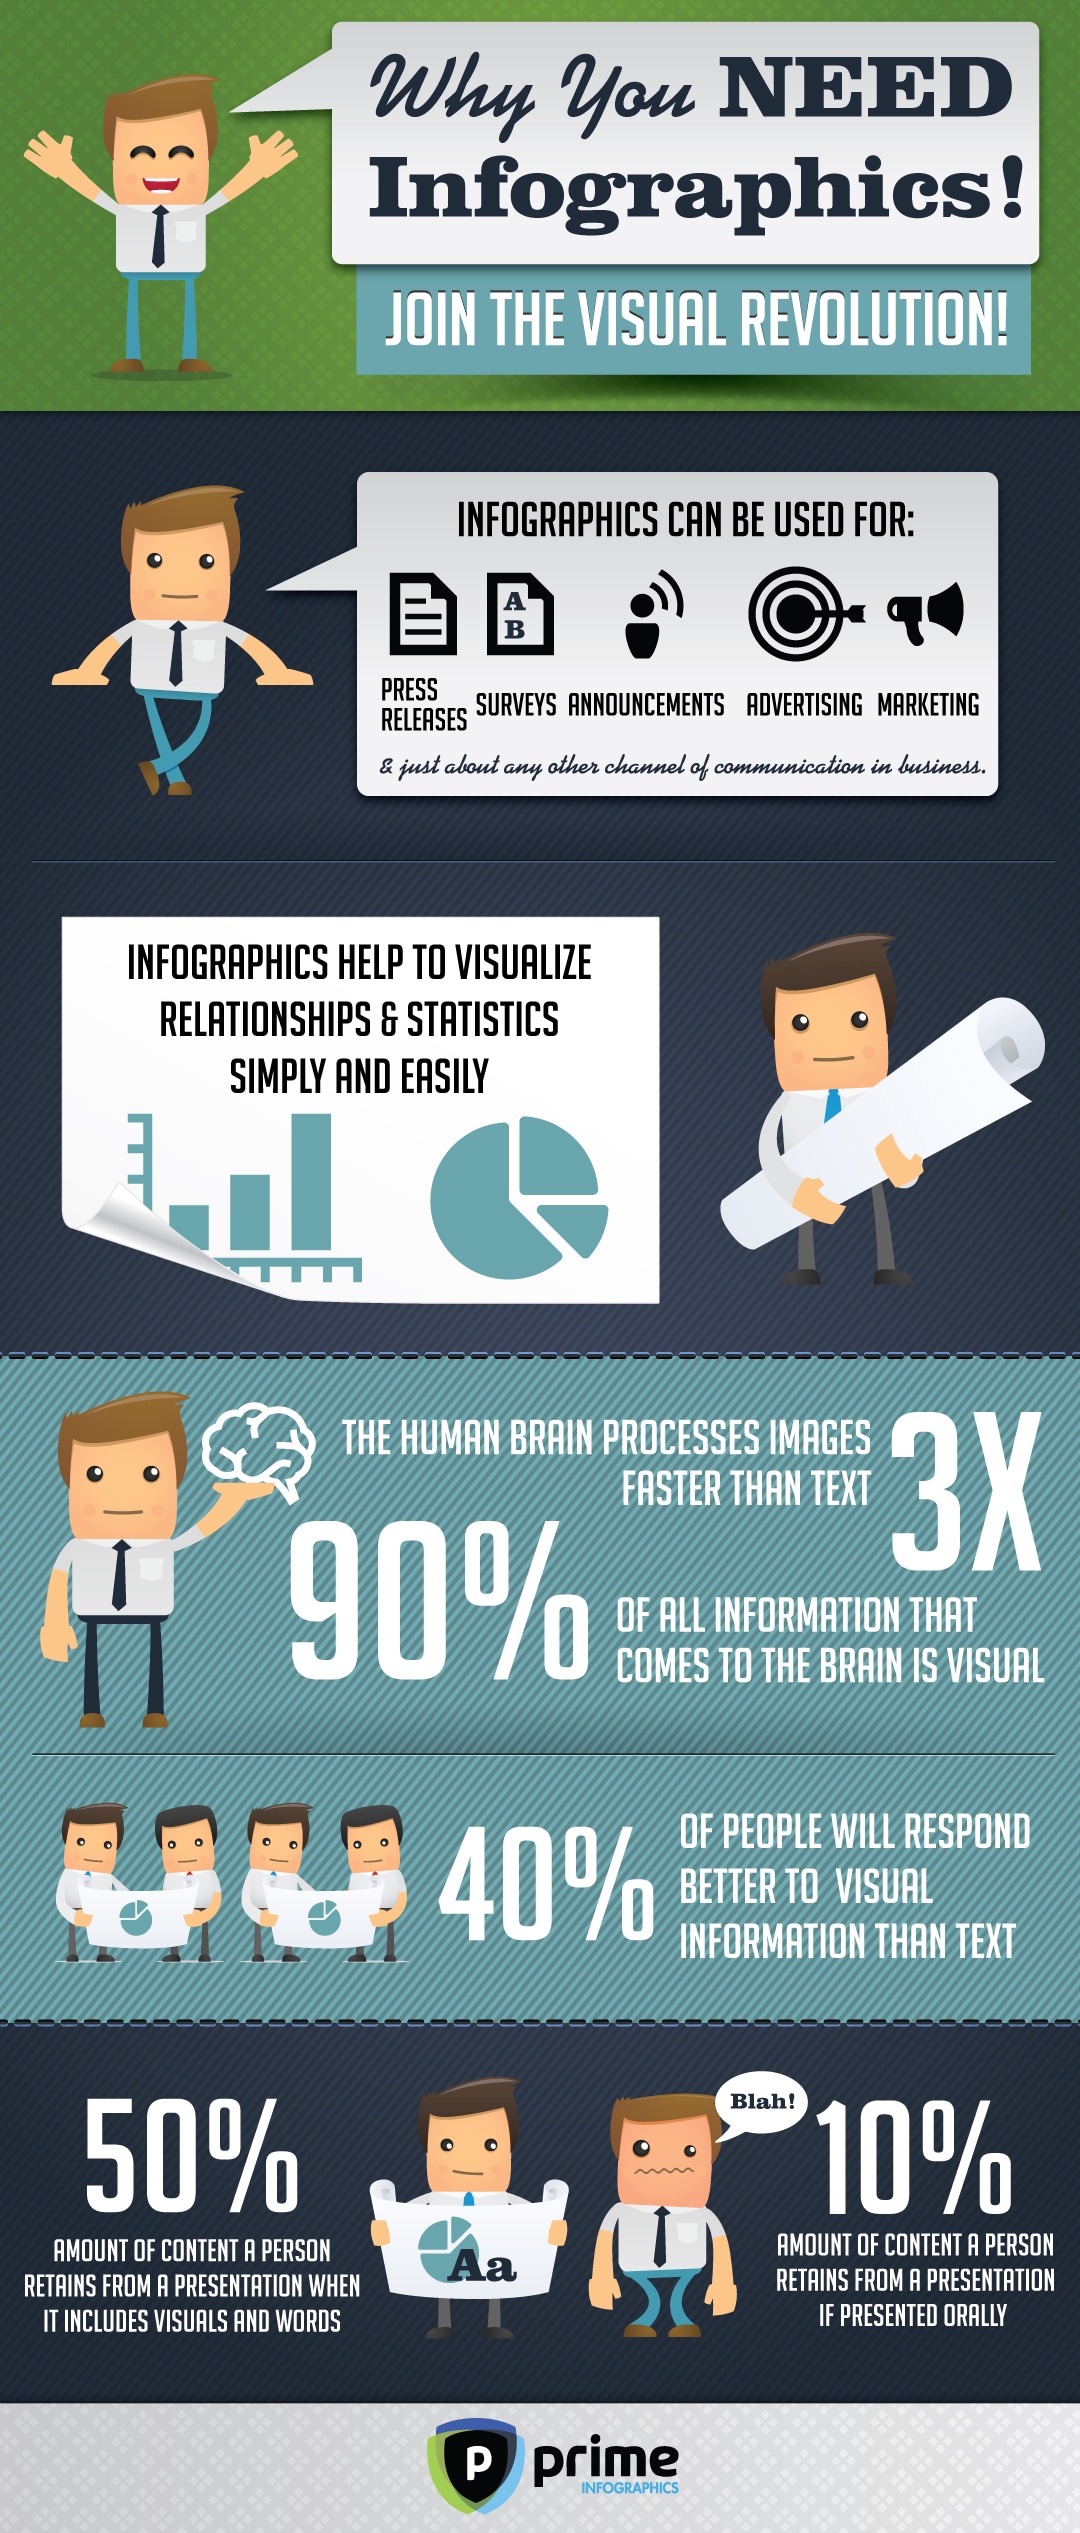 Visual Information & How It Affects Website Traffic [Infographic]